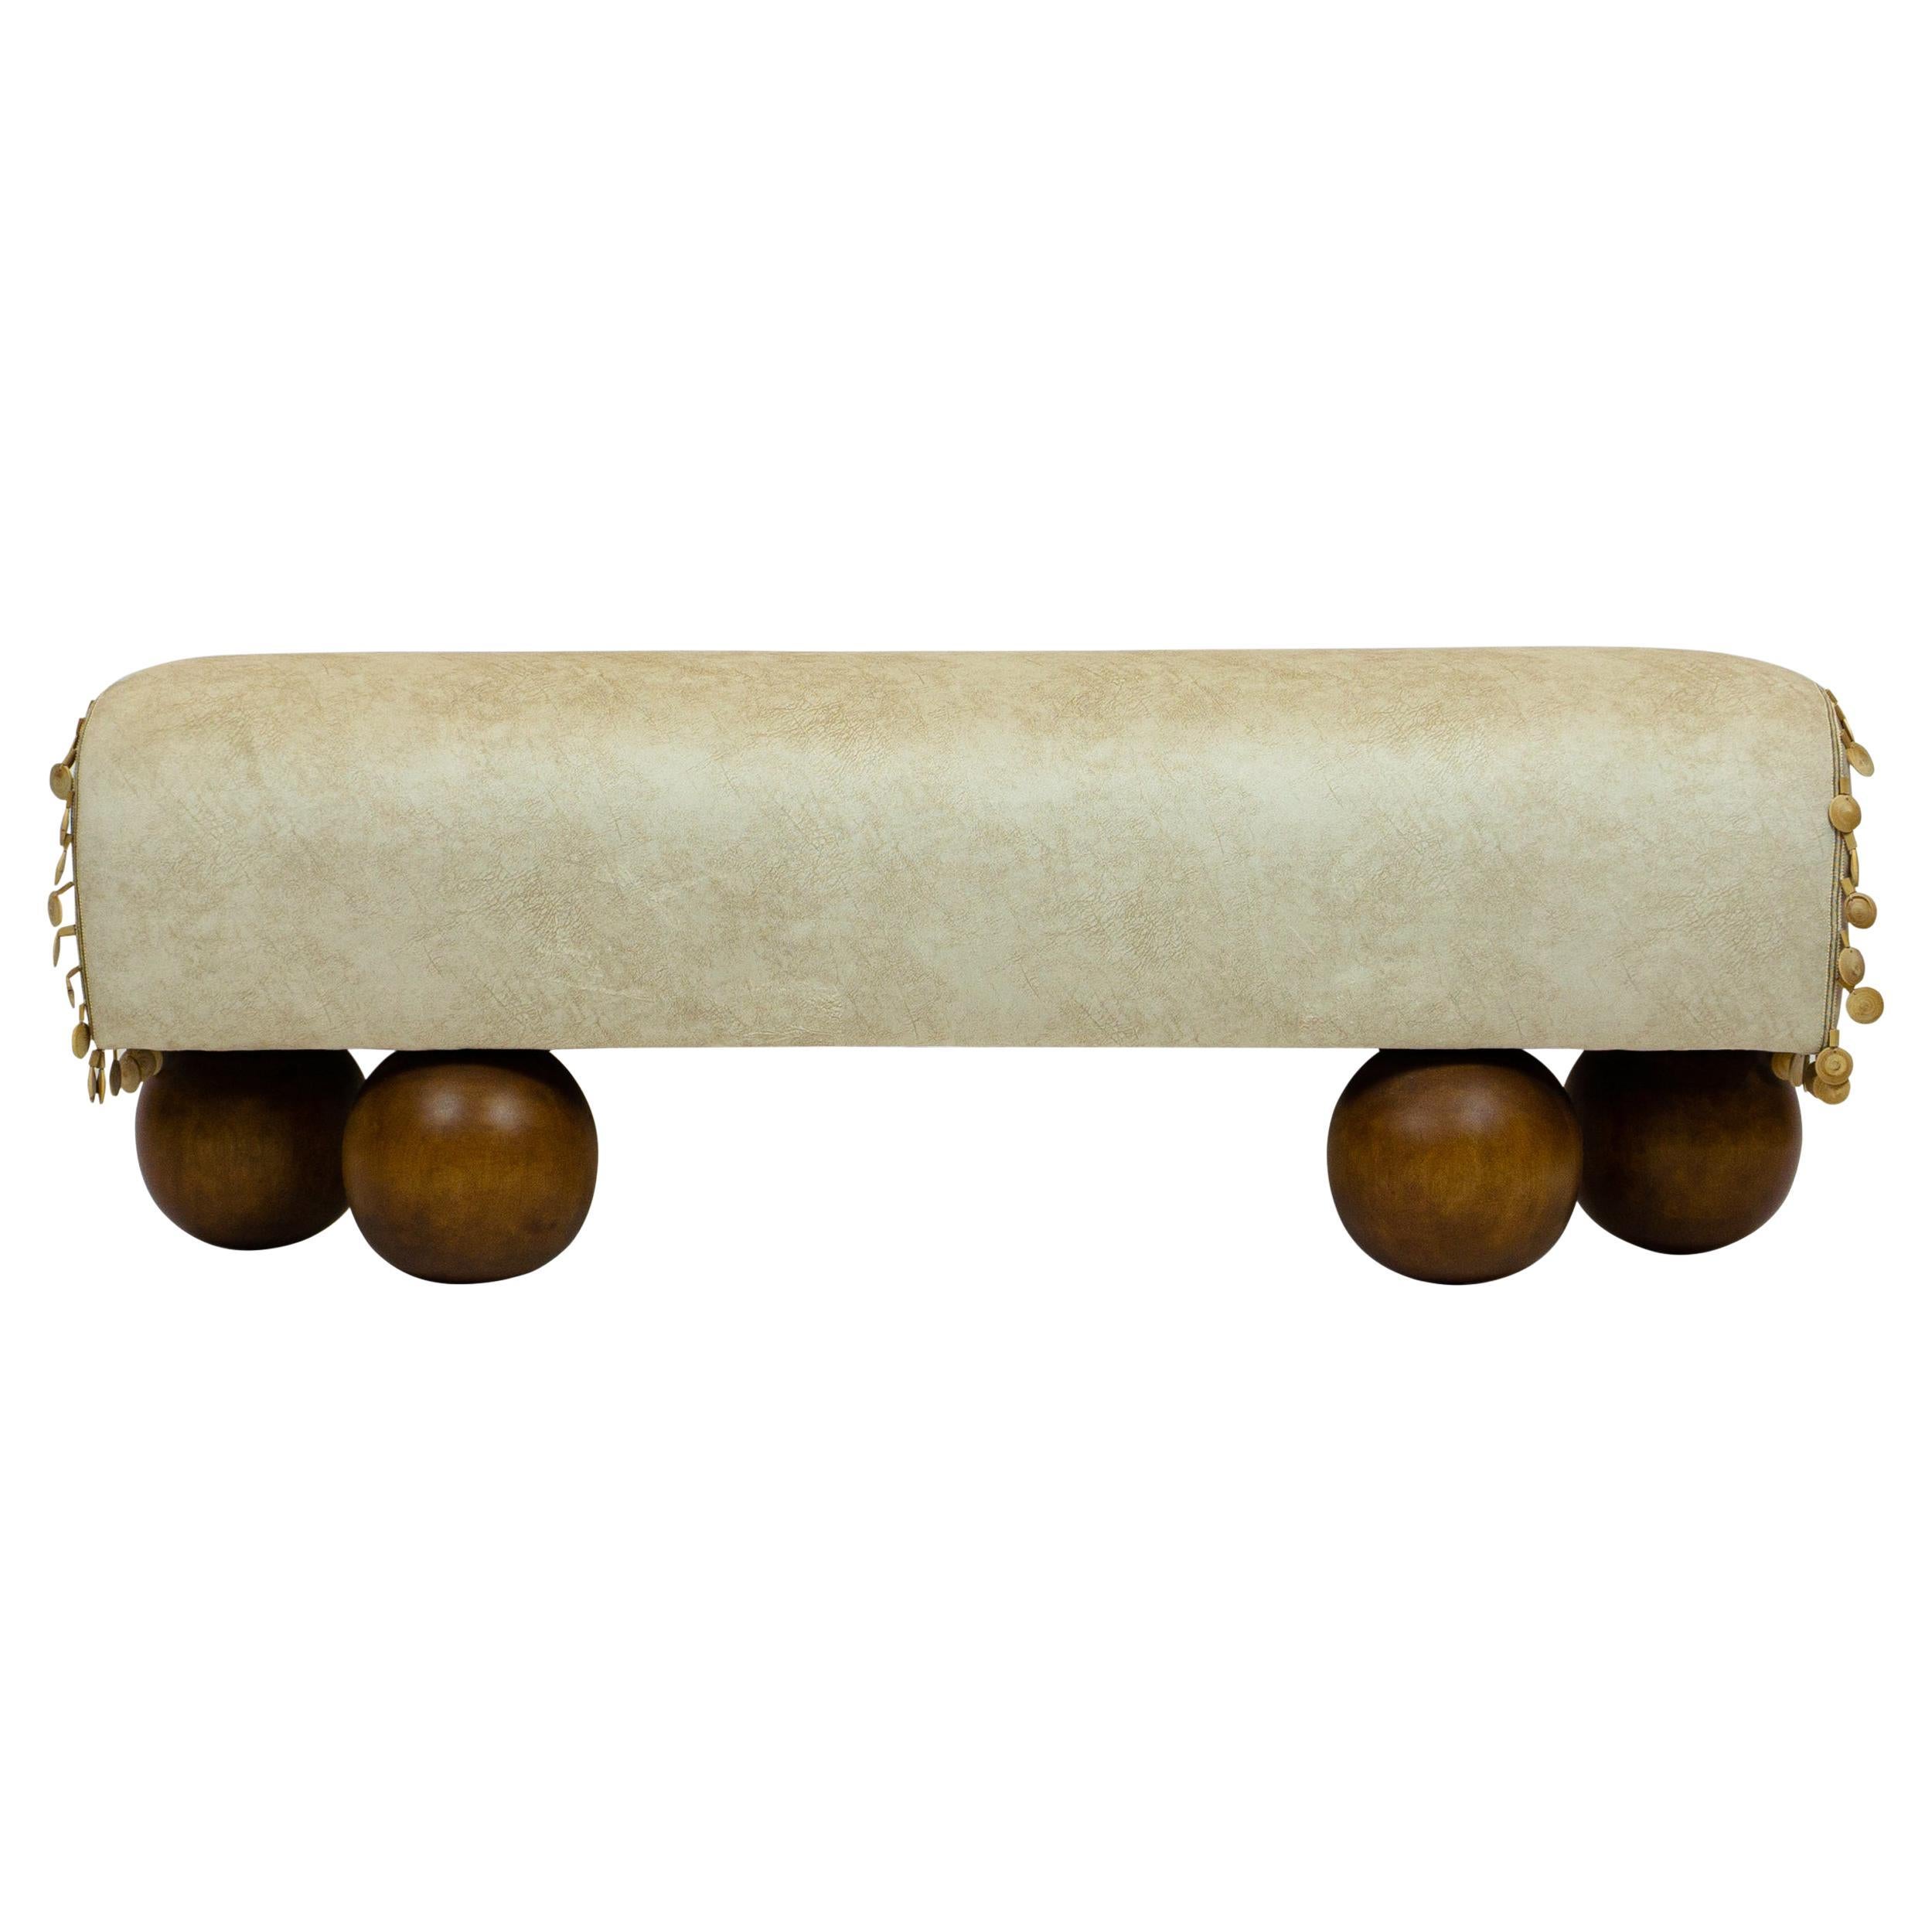 Walnut Ball Foot Bench with Saddle Shaped Seat - Customizable For Sale